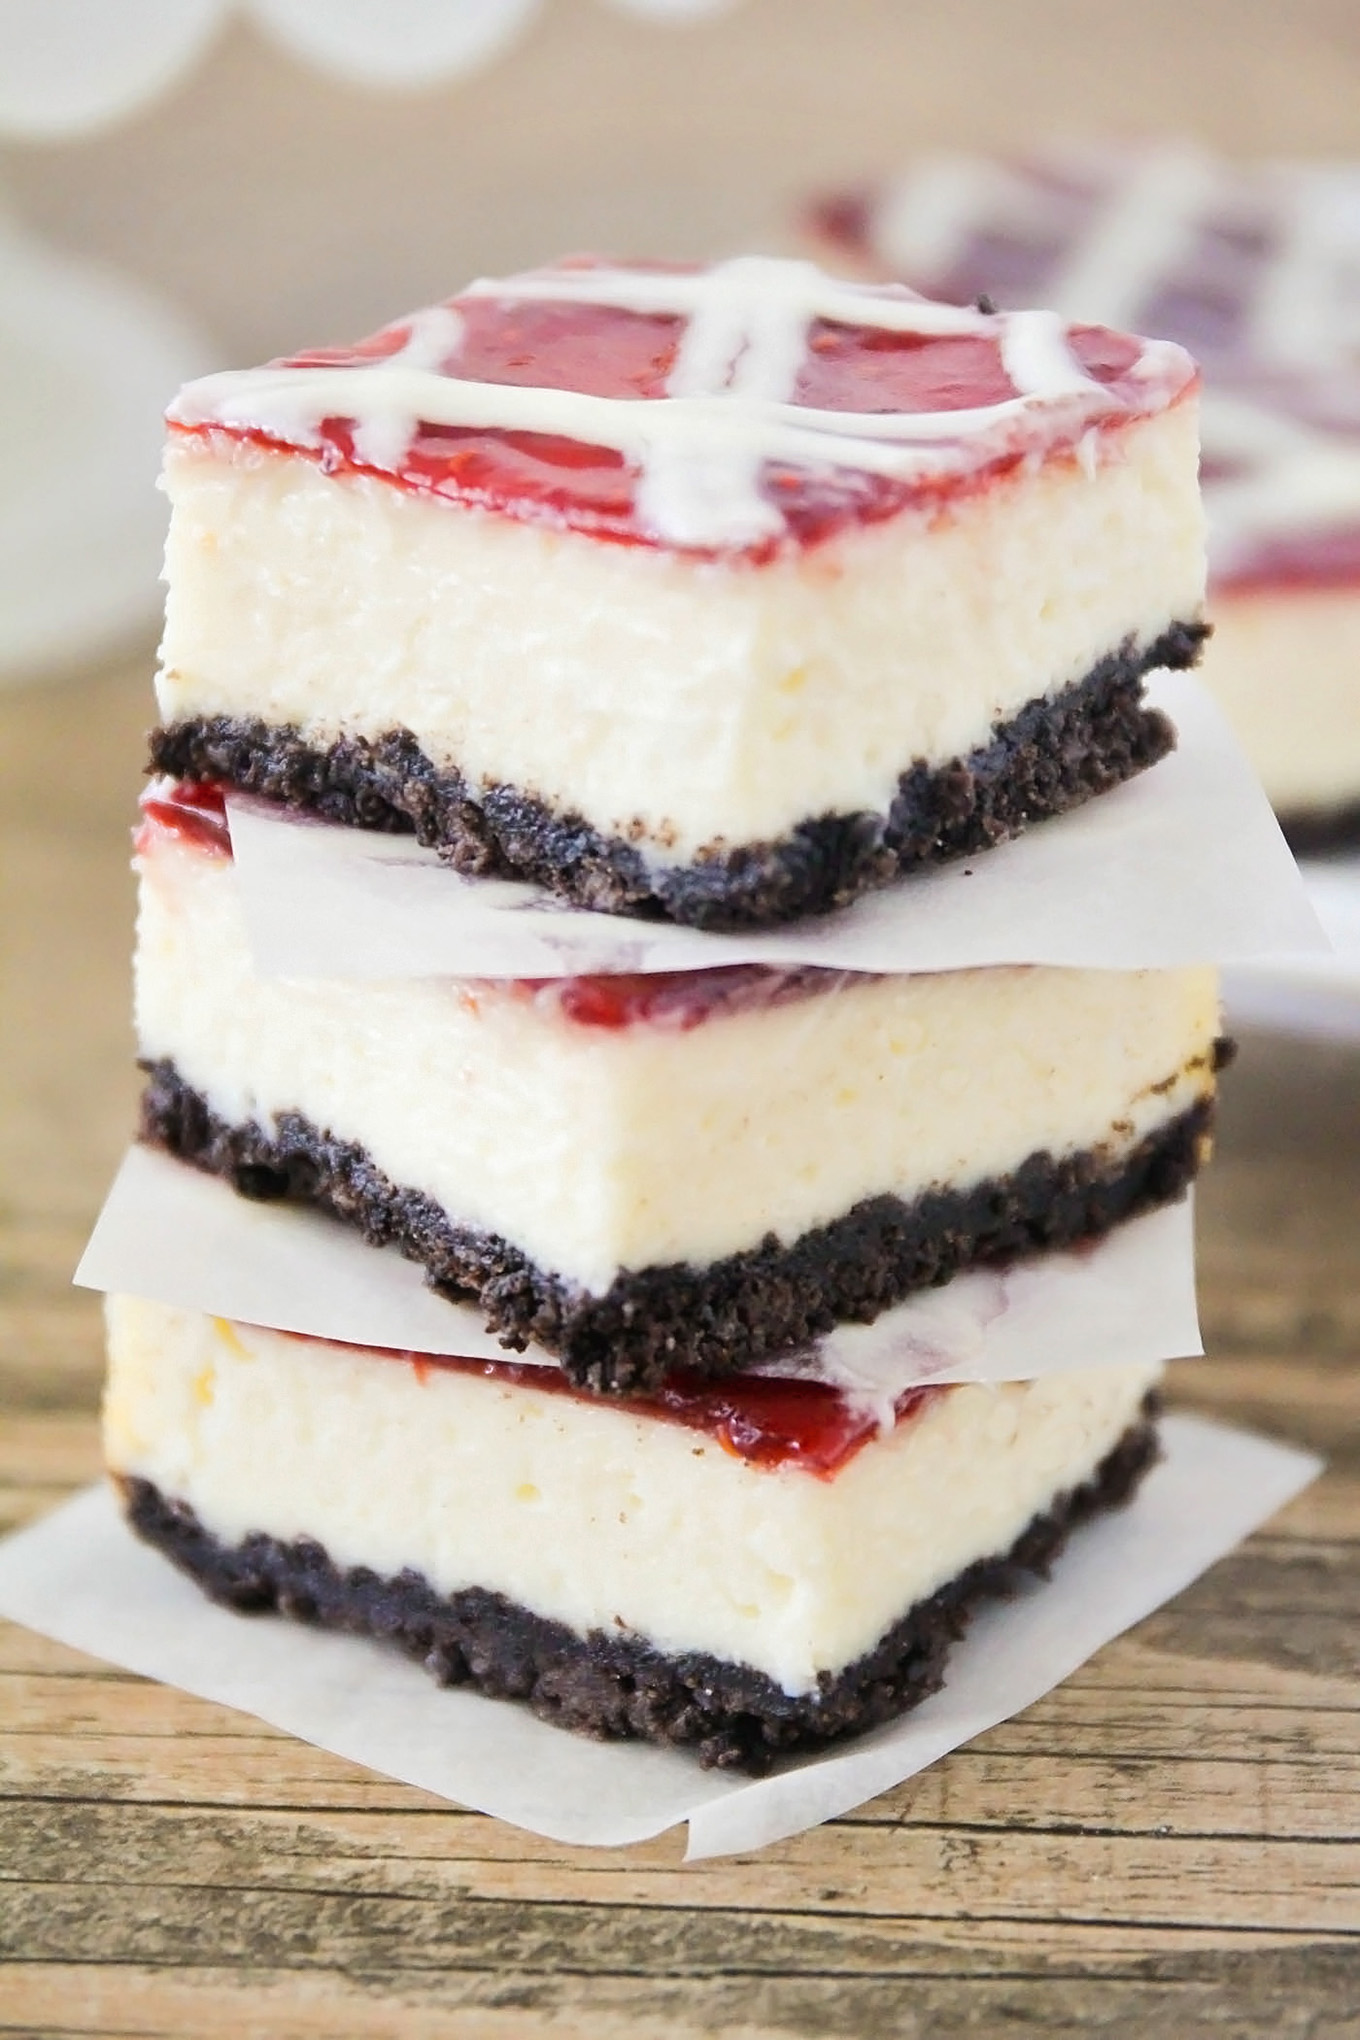 These White Chocolate Raspberry Cheesecake Bars may look fancy but they're easy to make! The rich flavors and homemade oreo crust make them hard to resist.